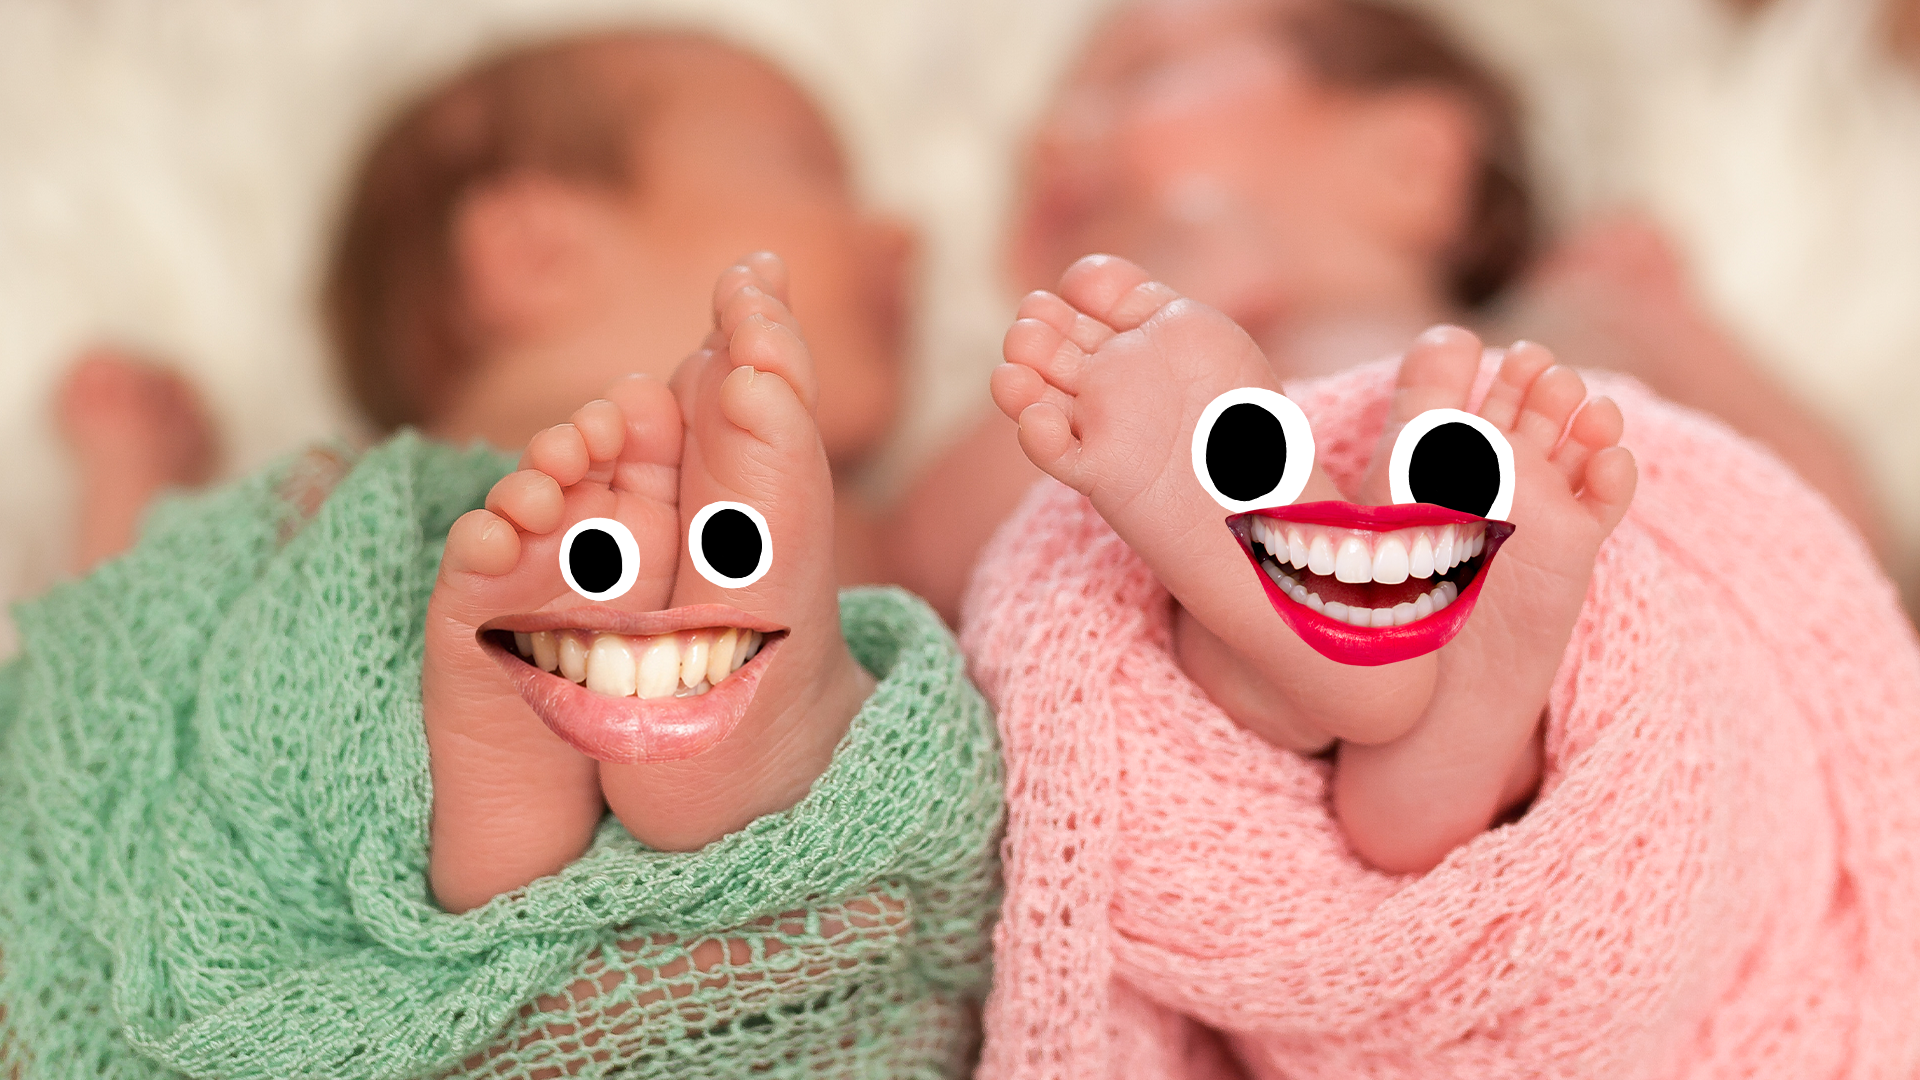 Two babies feet with smiley faces on them